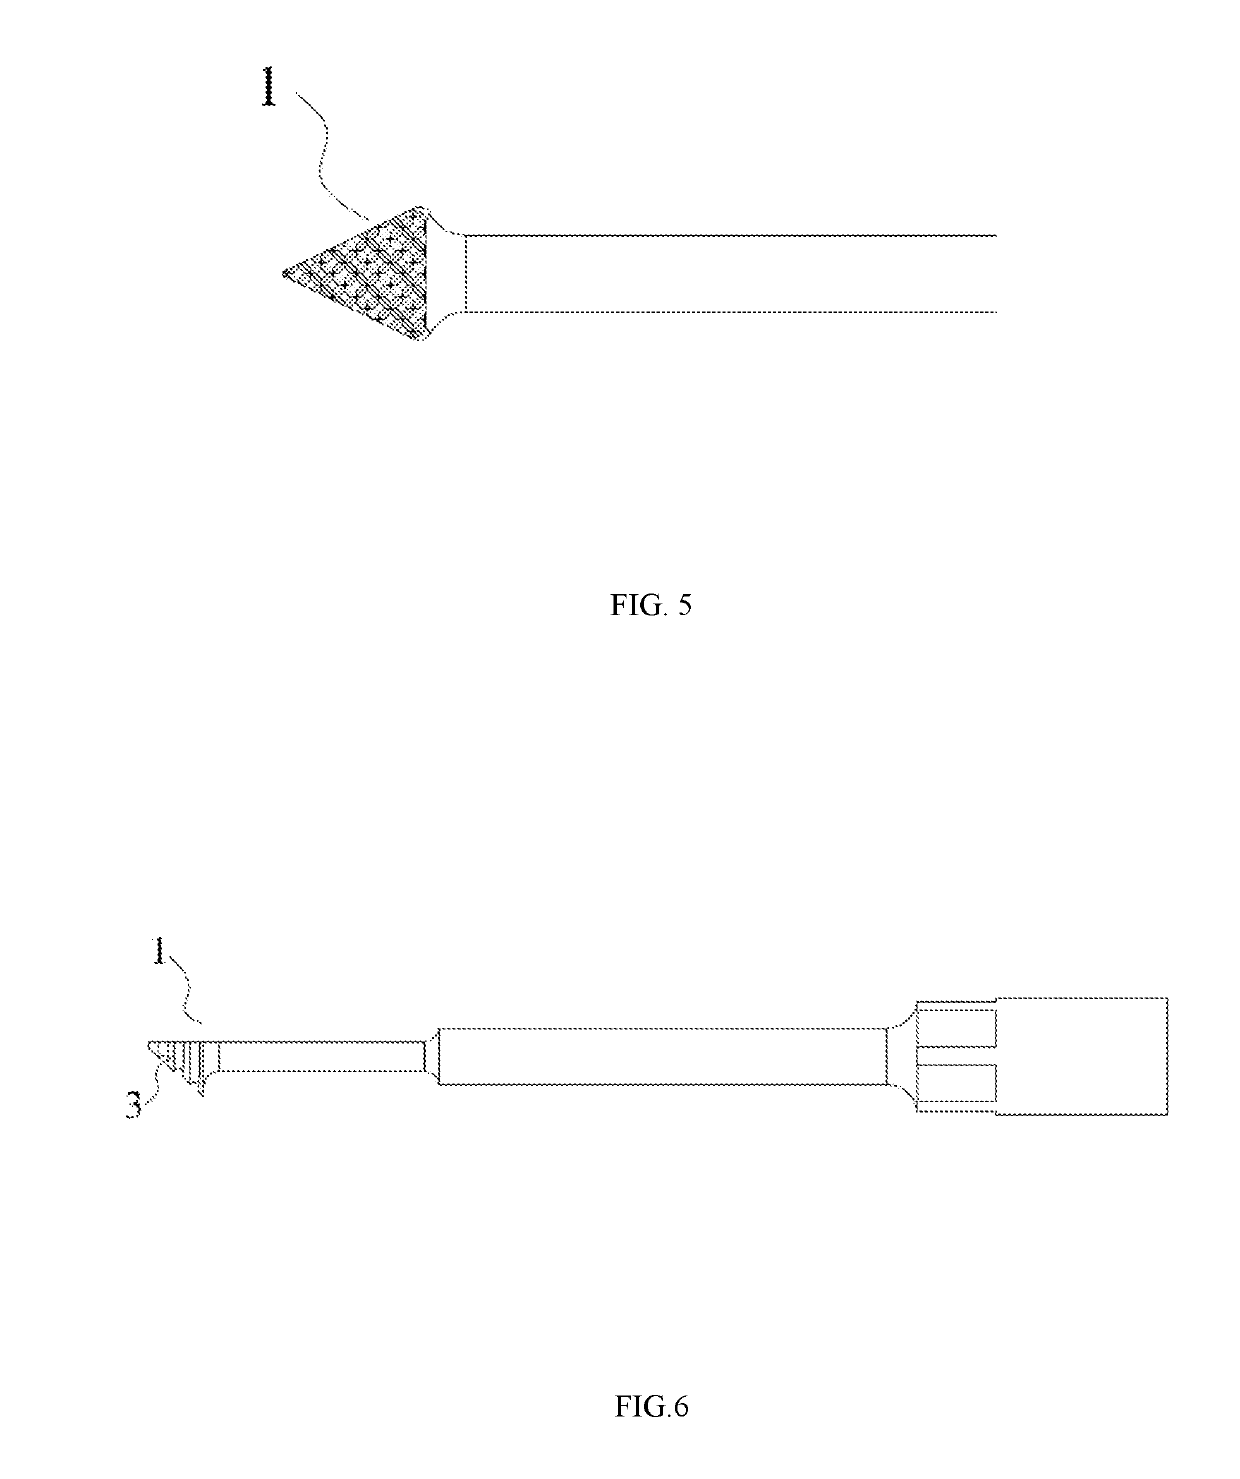 Tool bit for an ultrasonic osteotome